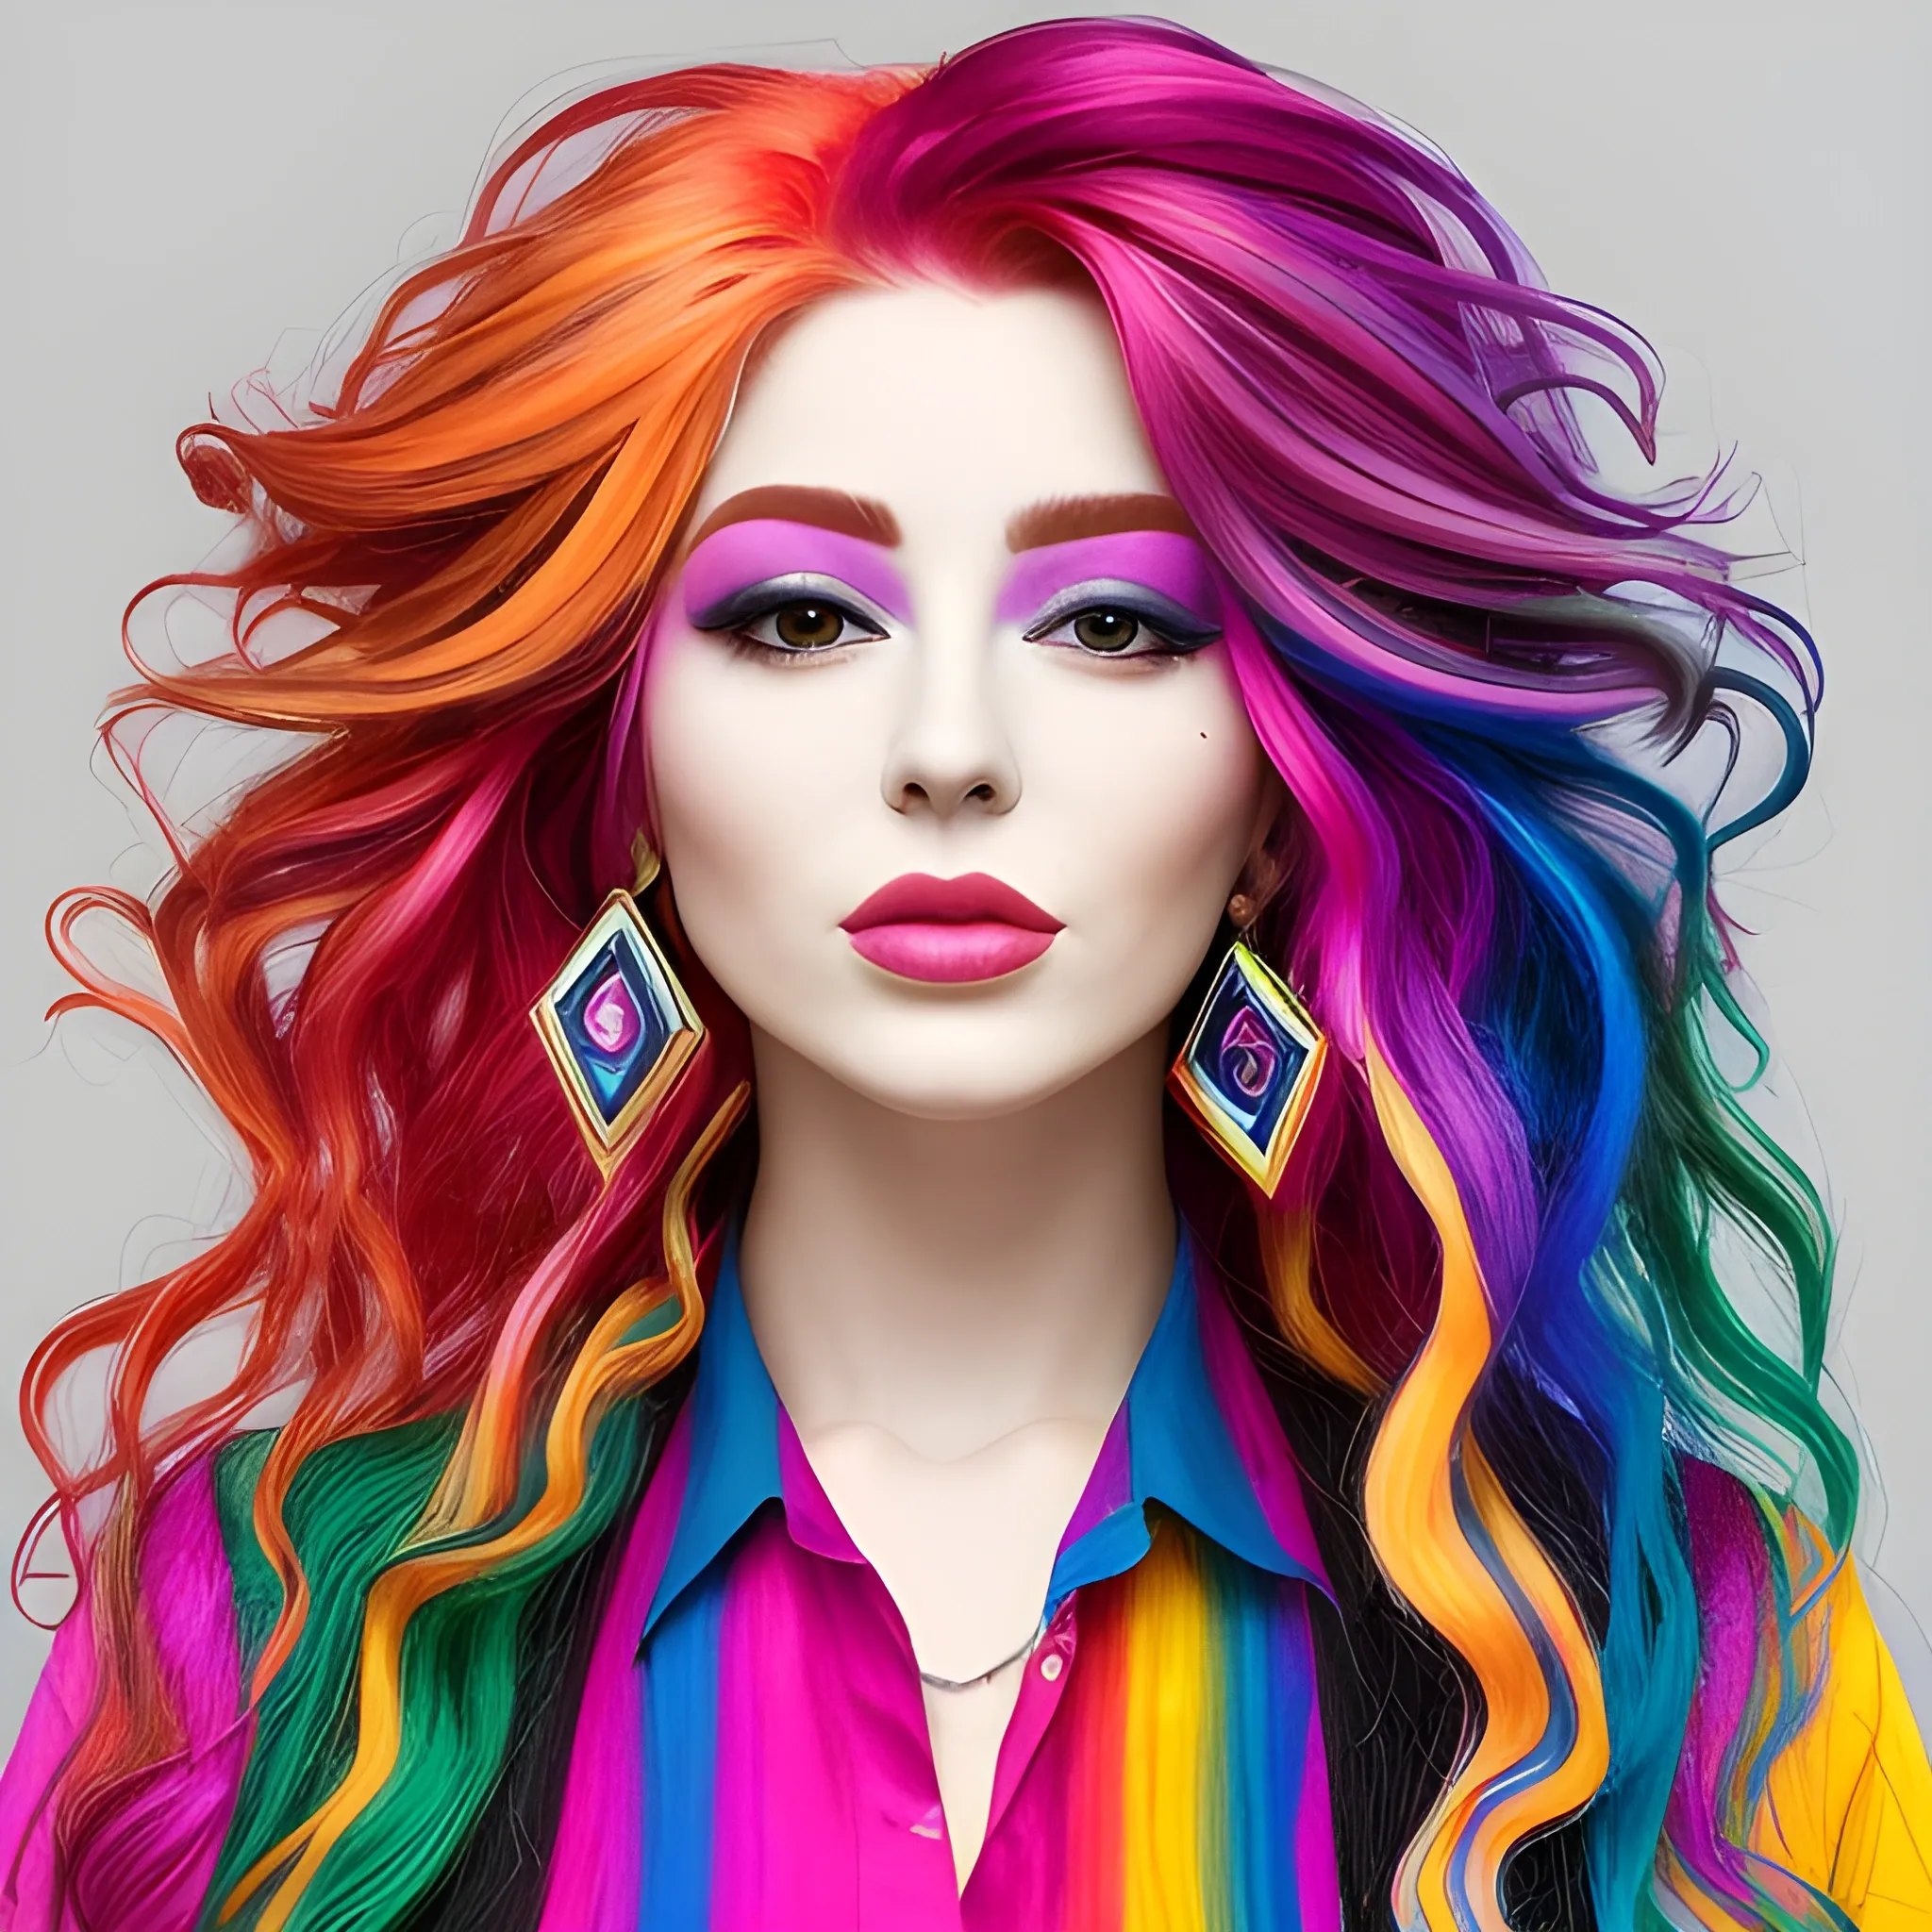 the woman is wearing multicolored hair, vibrant color scheme